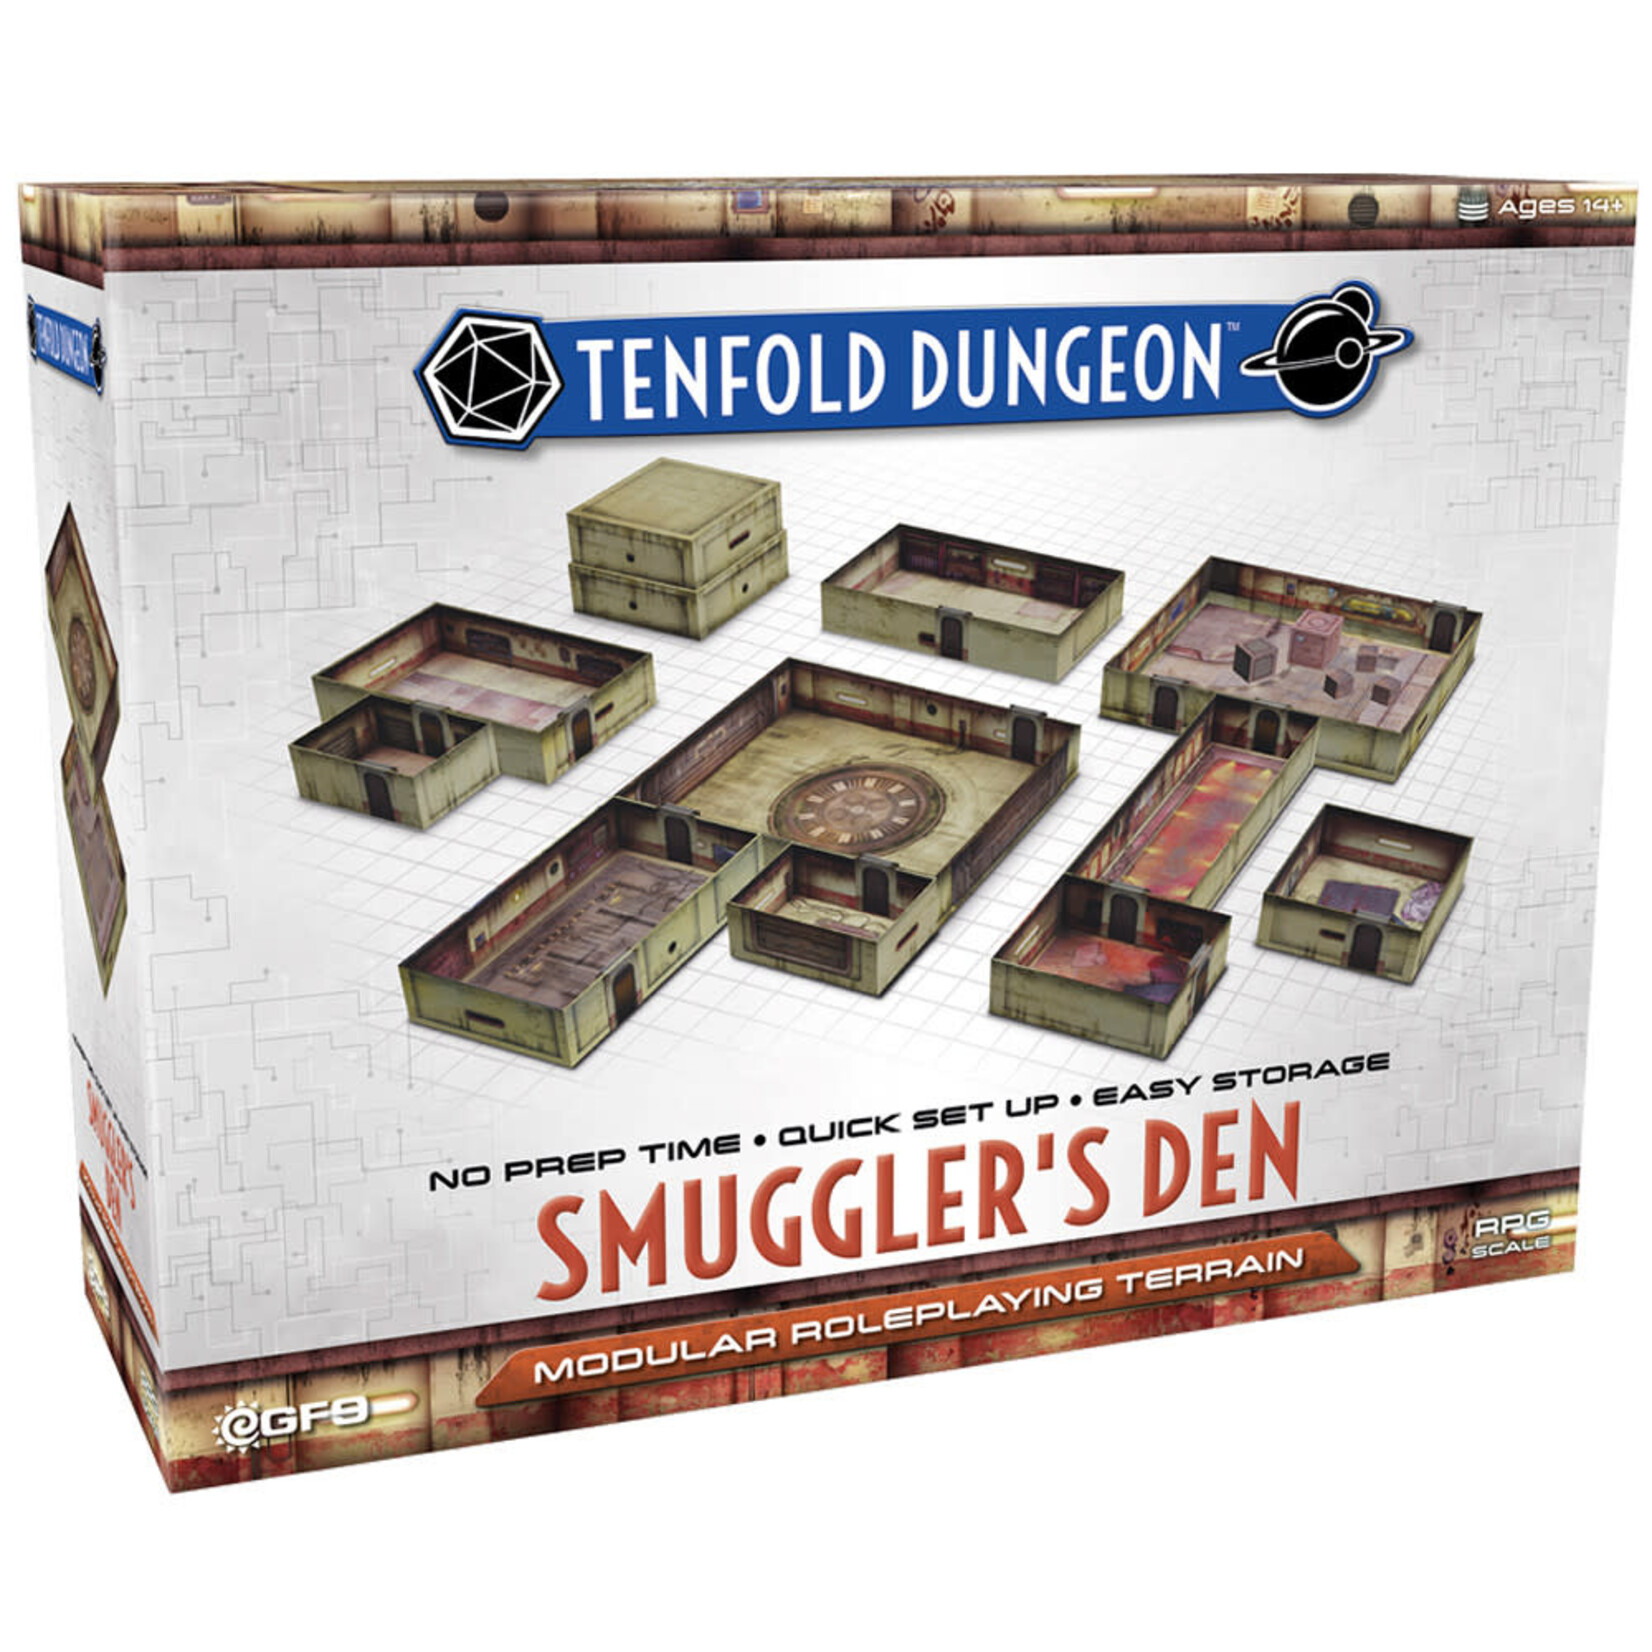 Gale Force 9 Tenfold Dungeon Smuggler's Den